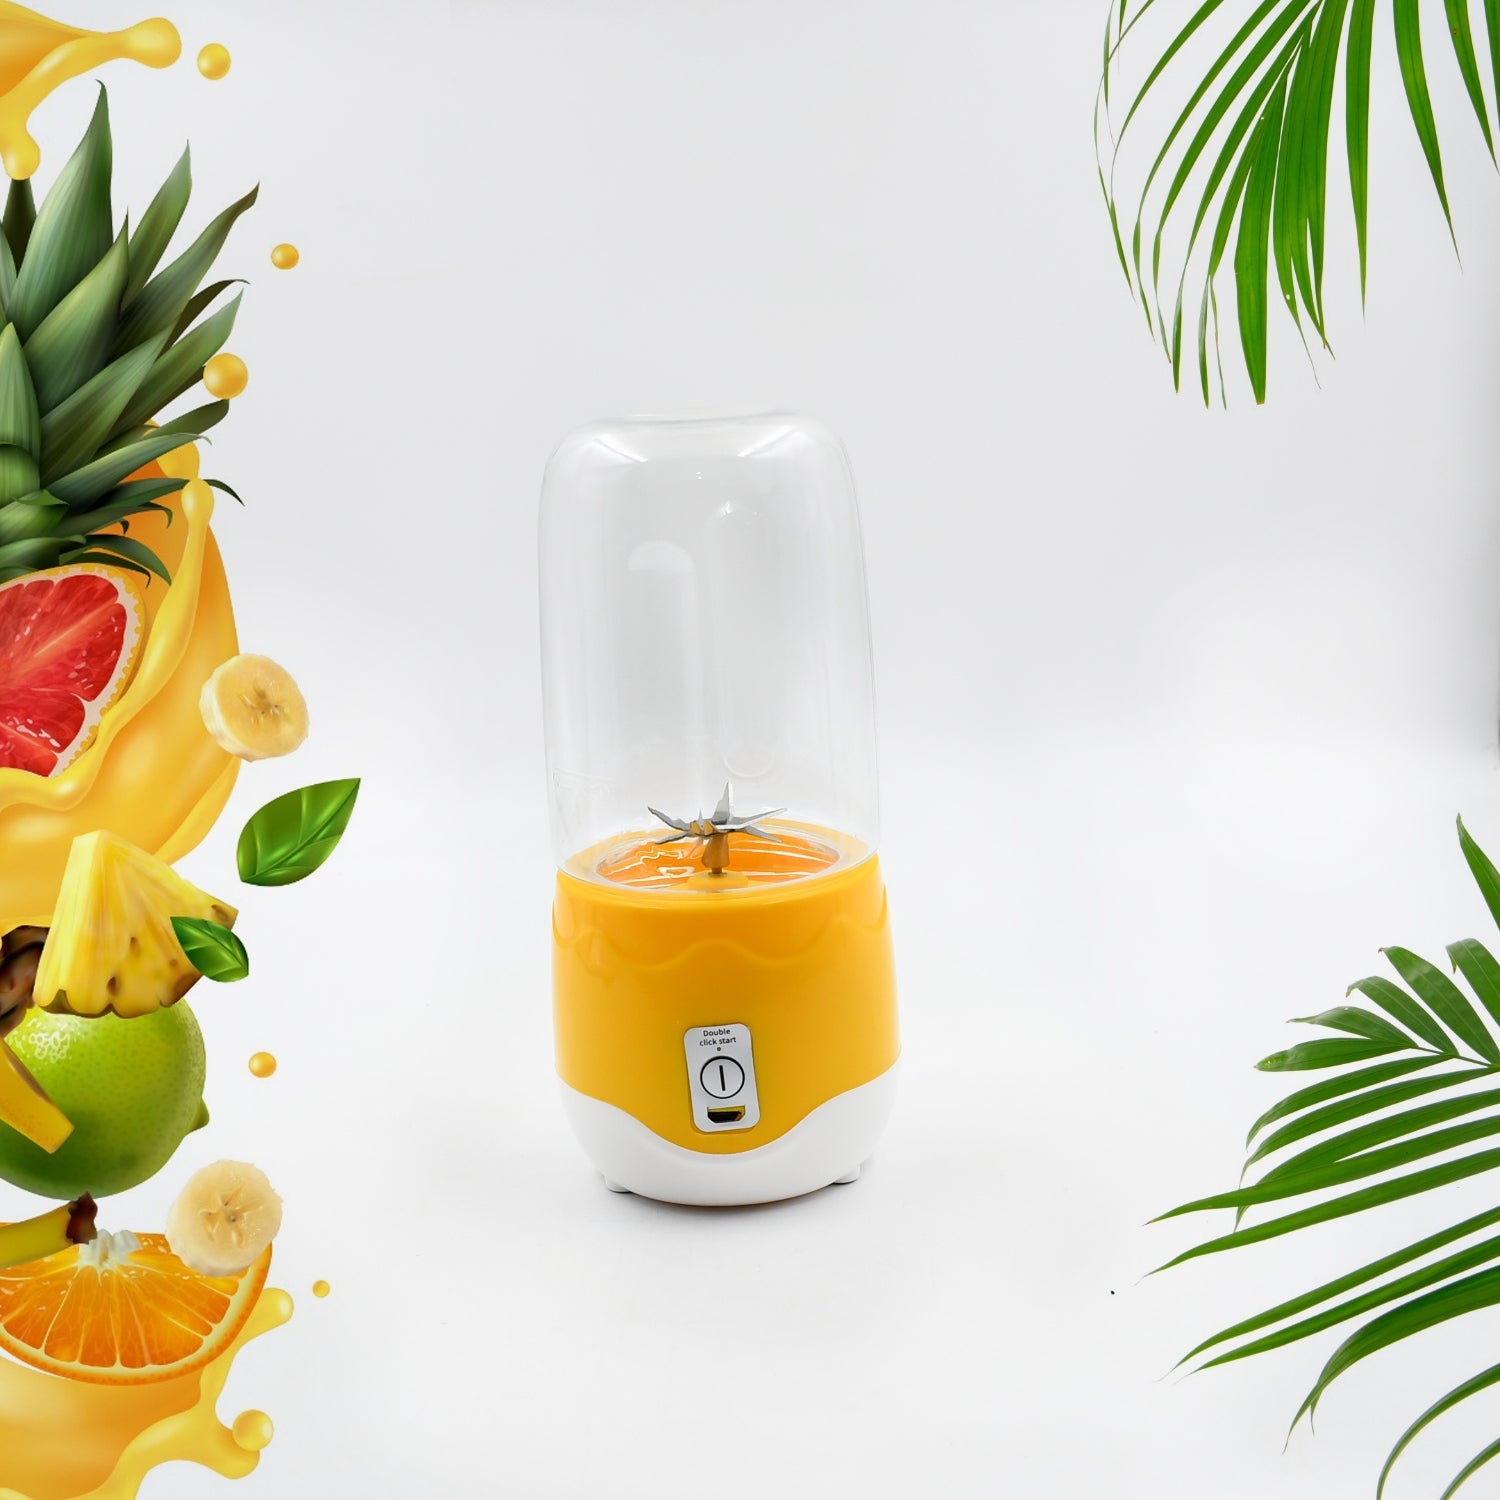 2260A Portable Electric USB Juice Maker 6 blade Blender Grinder Mixer Personal Size, USB Rechargeable Mini Juicer for Smoothies and Shakes with Juicer Cup - 400ml